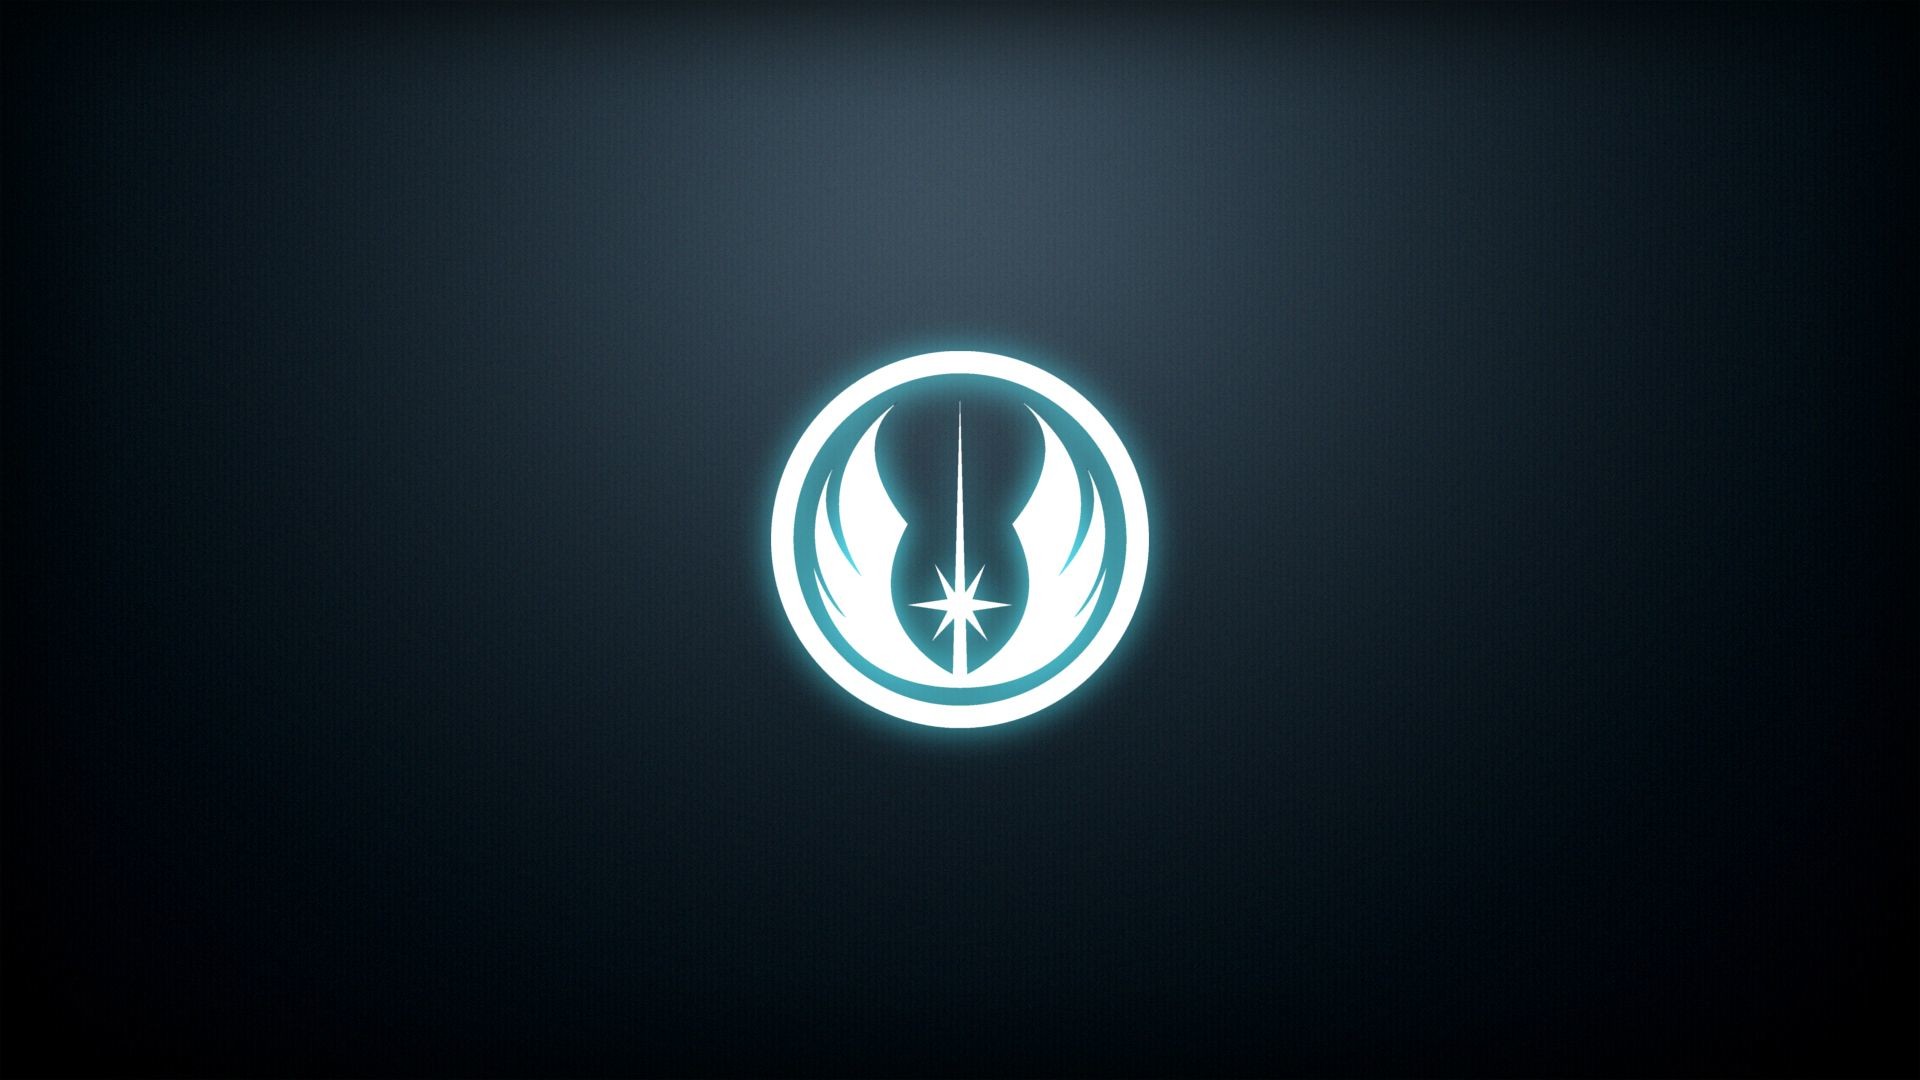 1920x1080 A wallpaper you guys might like. The Jedi Order emblem. I'll do